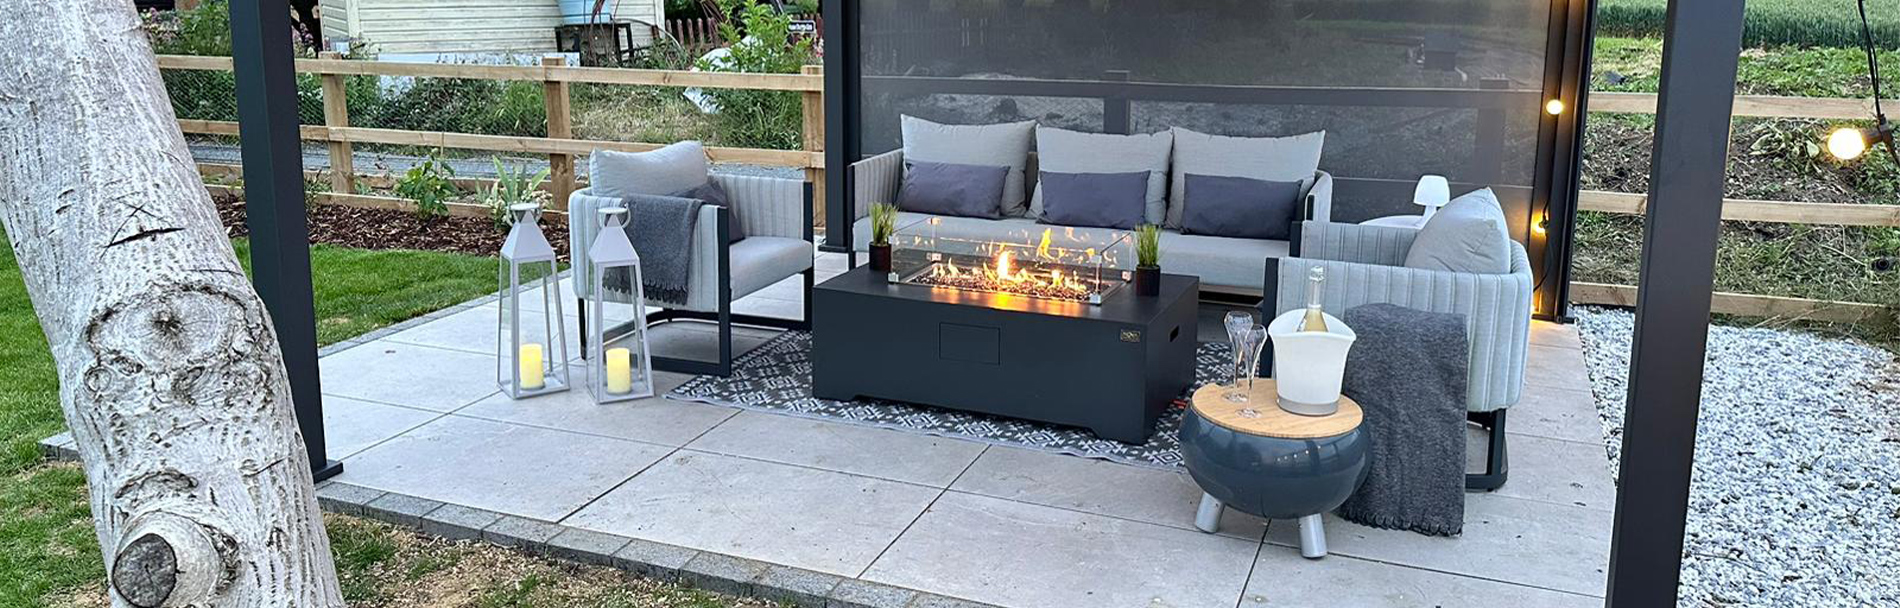 Oakley all-weather fabric garden furniture on a patio underneath a pergola with a fire pit table.